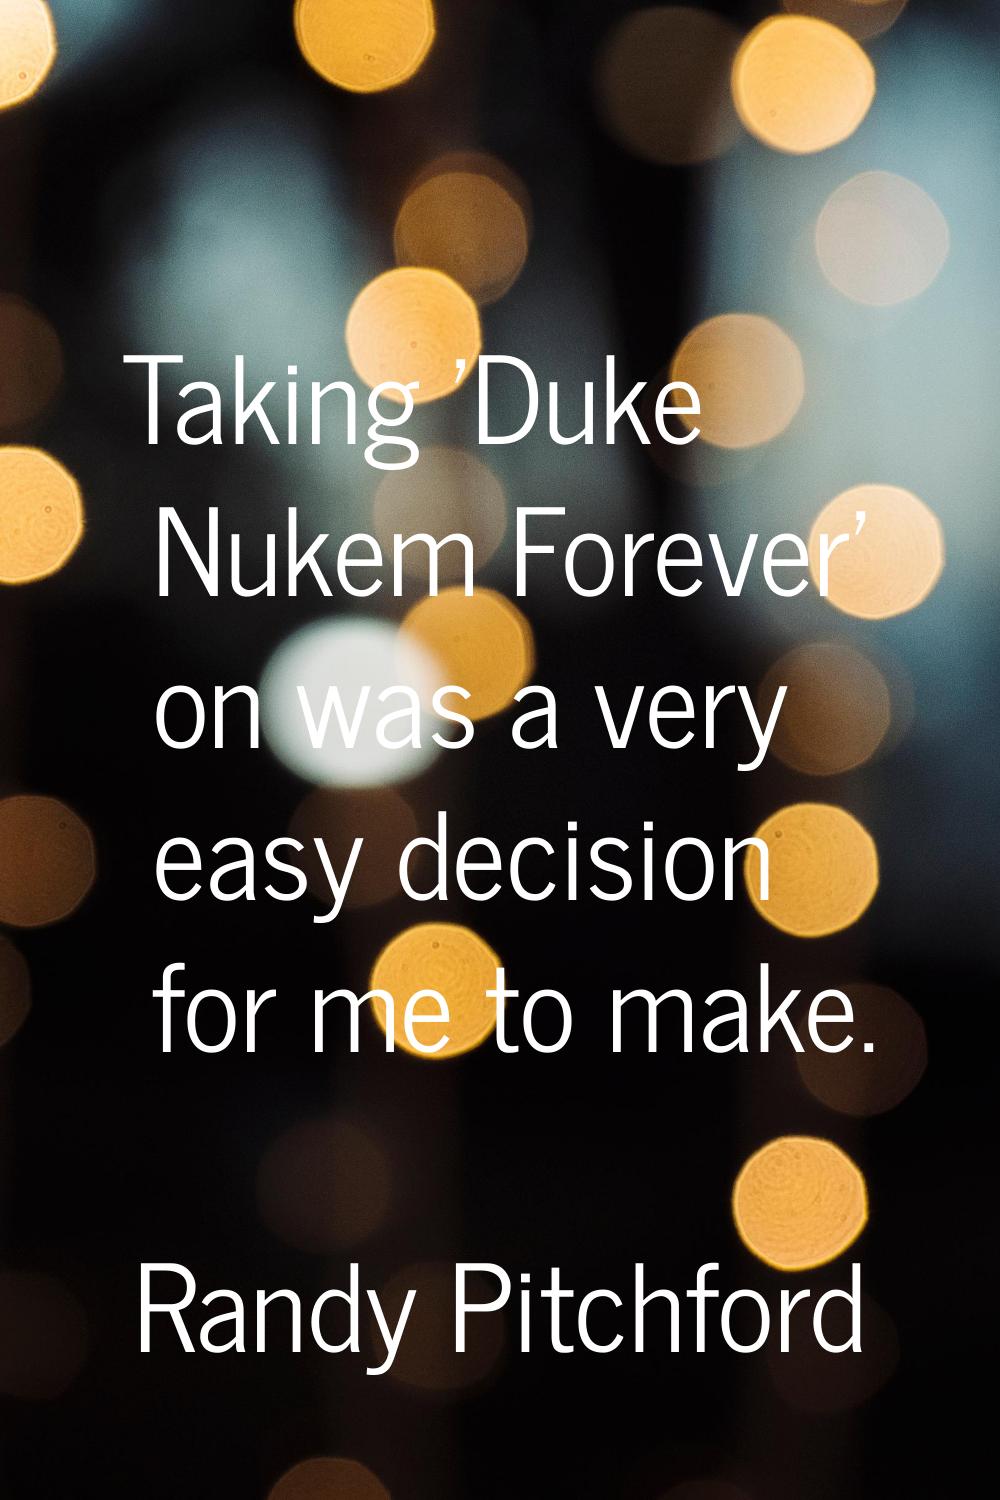 Taking 'Duke Nukem Forever' on was a very easy decision for me to make.